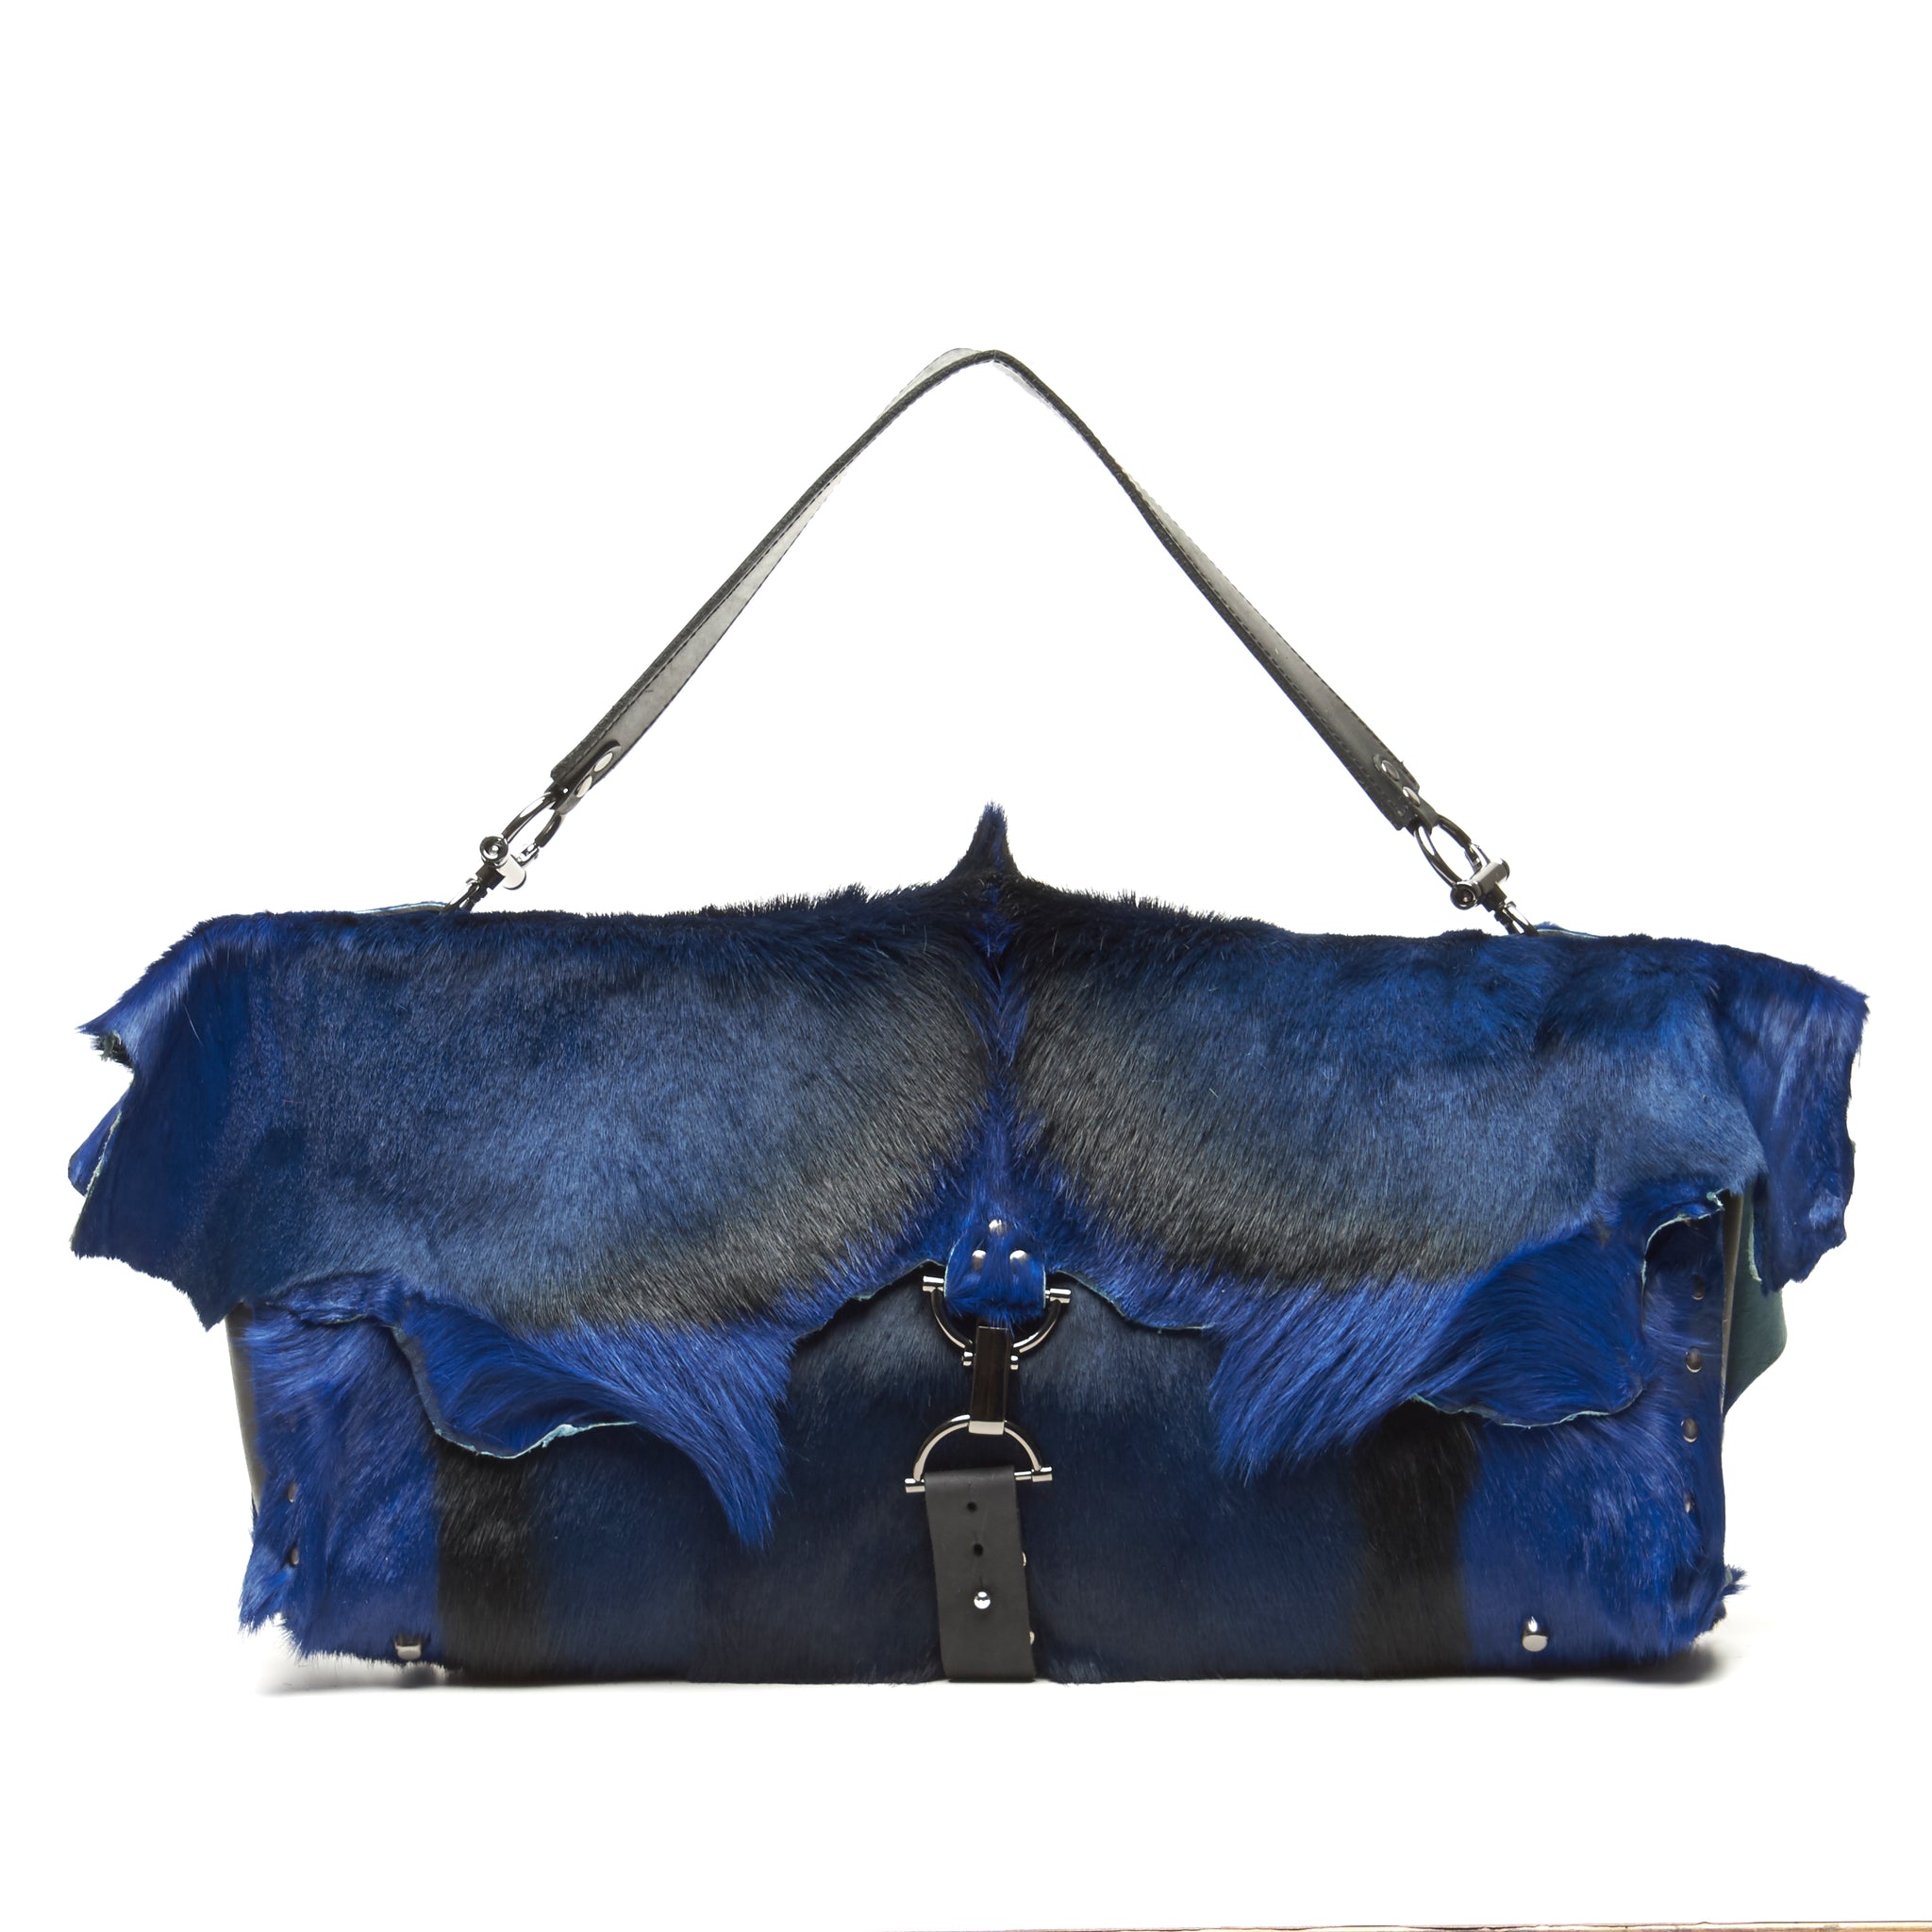 BRIGHTLY DYED SPRINGBOK OVERSIZED BAG BY NYET JEWELRY